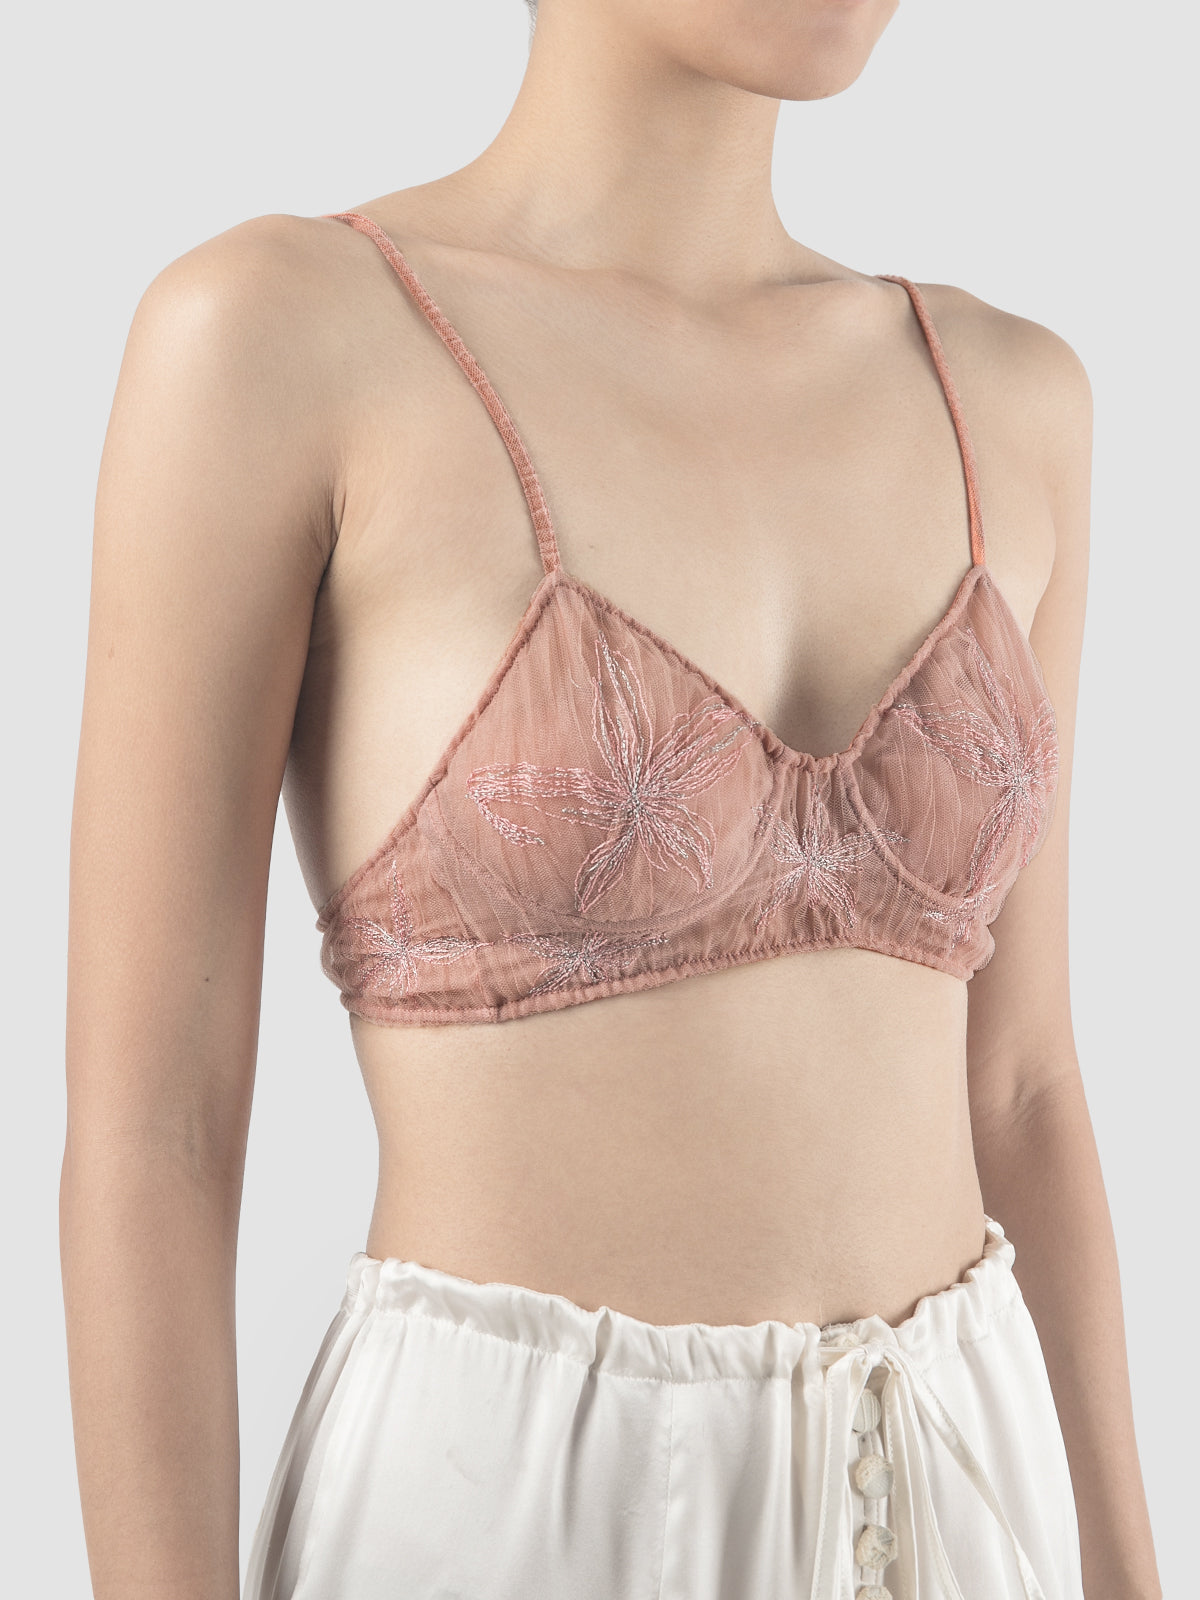 Gorden sheer pink bralette with pink-silver embroidery – PILLAR